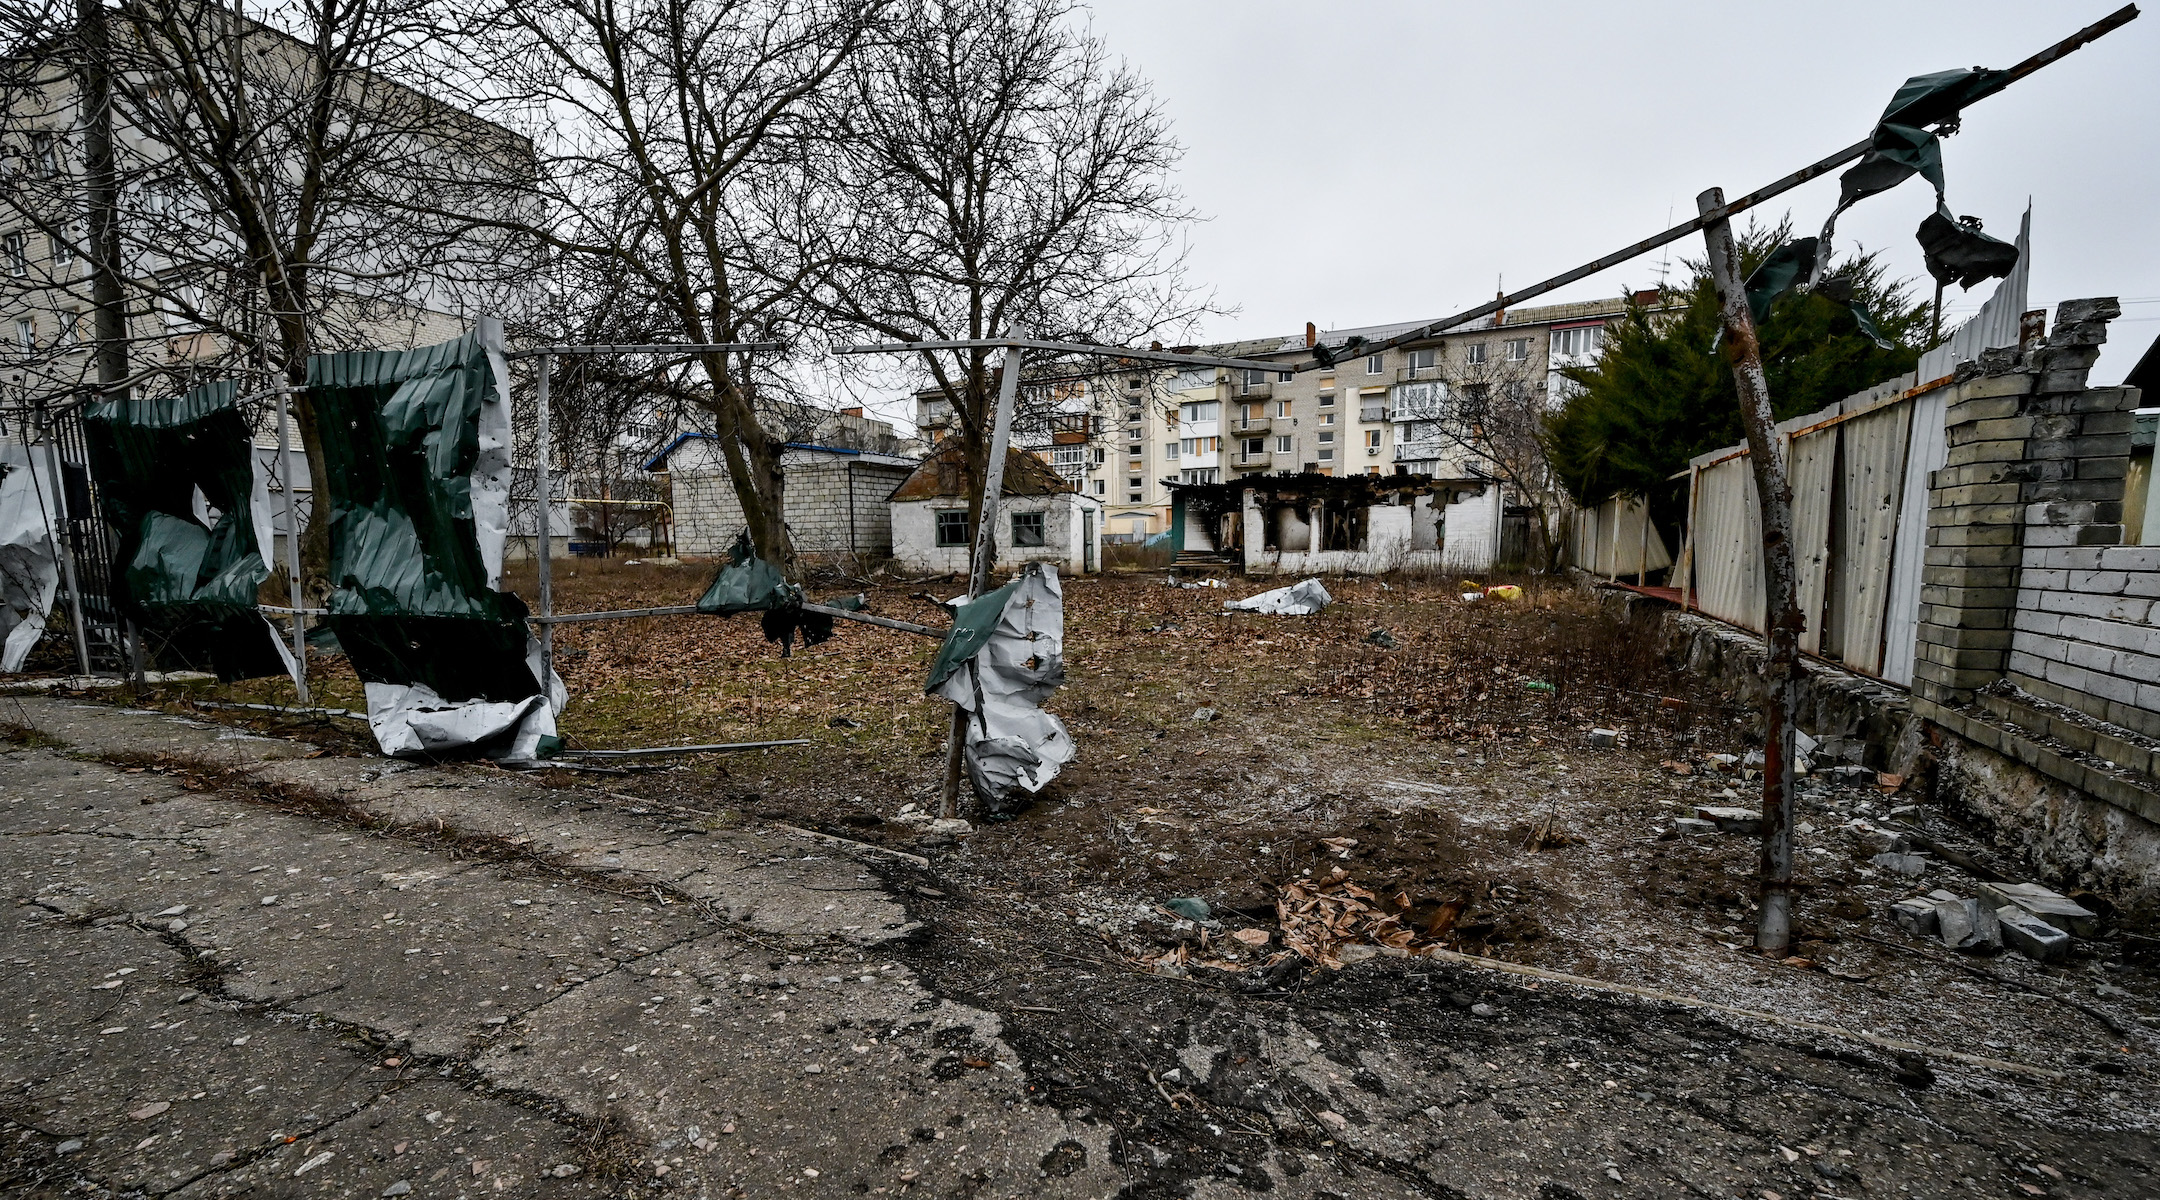 A view of Huliaipole, Ukraine, shows the effects of Russian bombing, Jan. 14, 2023. (Dmytro Smolienko/Ukrinform/Future Publishing via Getty Images)